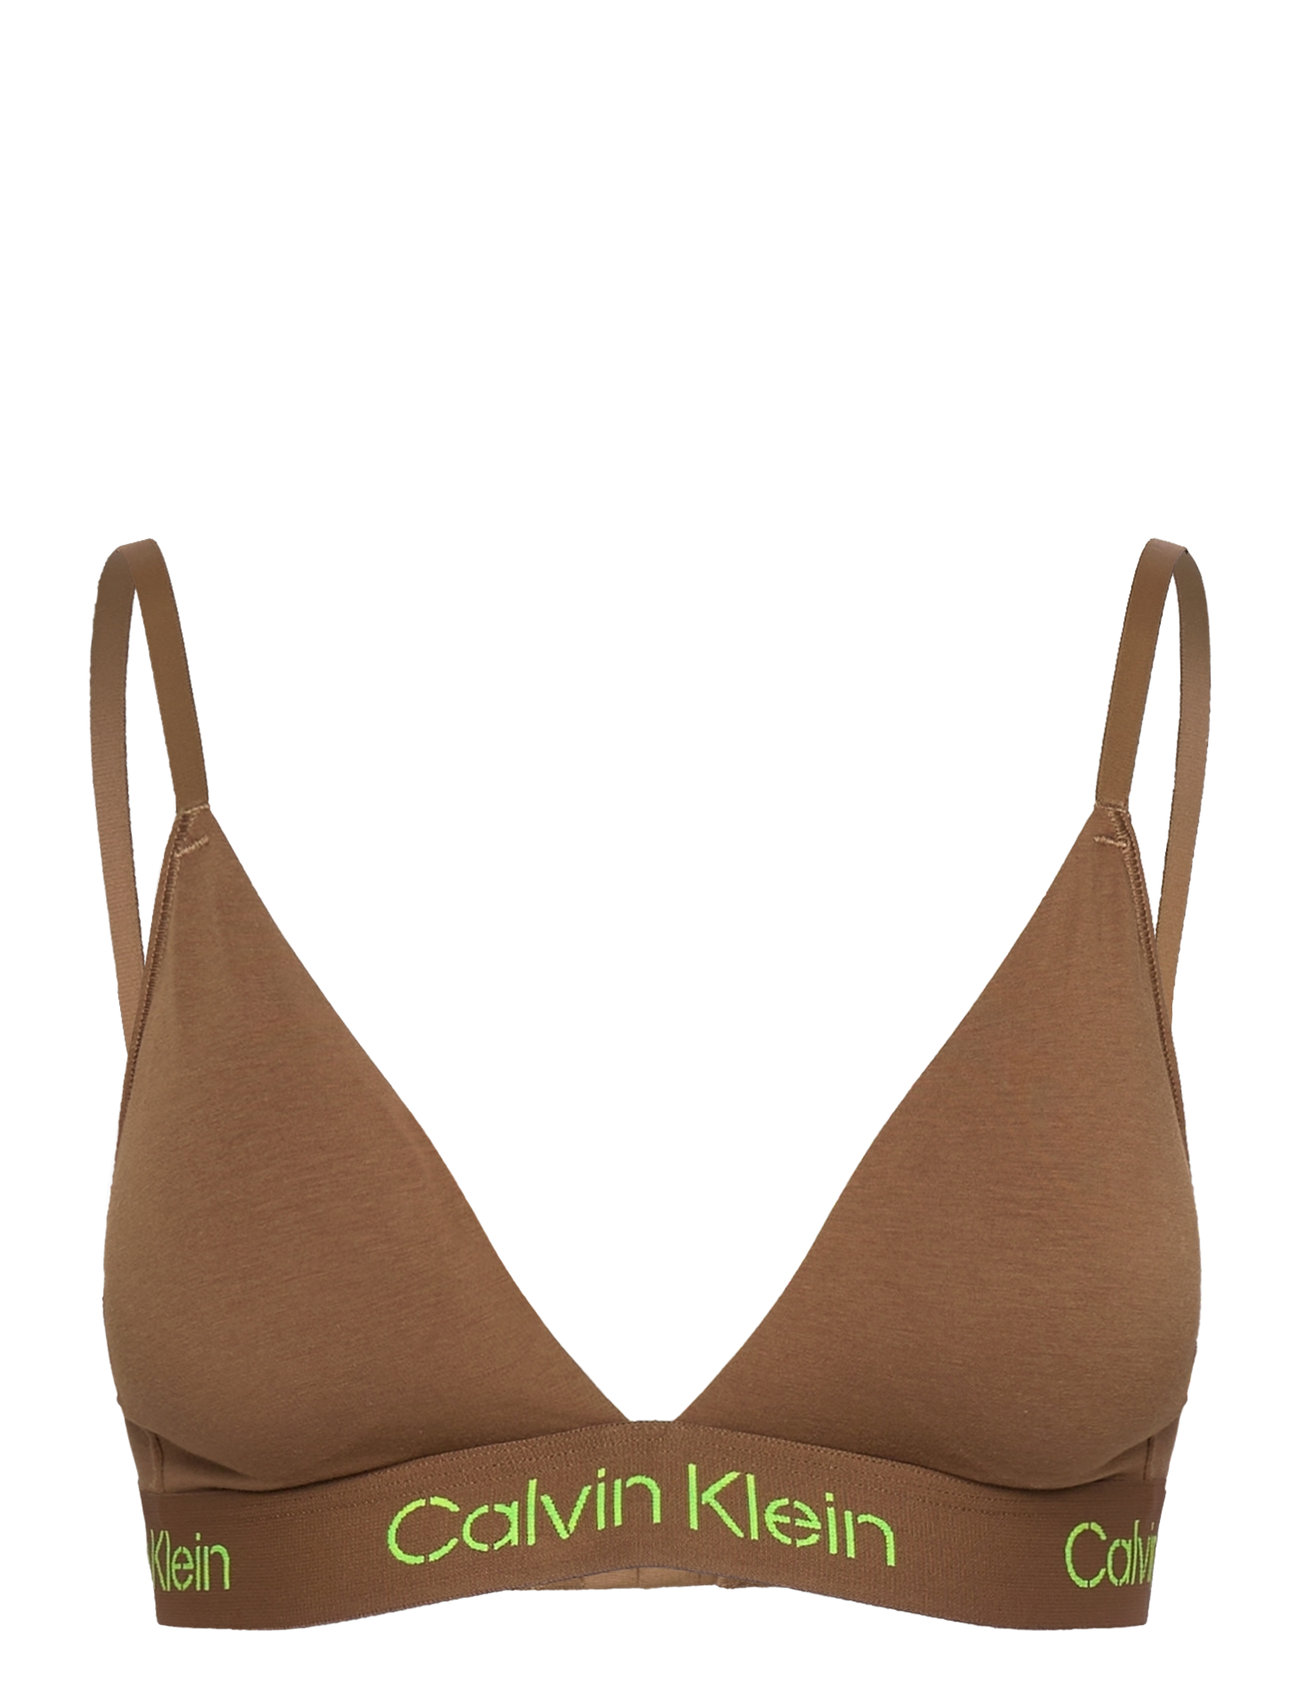 Lght Lined Triangle Lingerie Bras & Tops Soft Bras Non Wired Bras Brown Calvin Klein